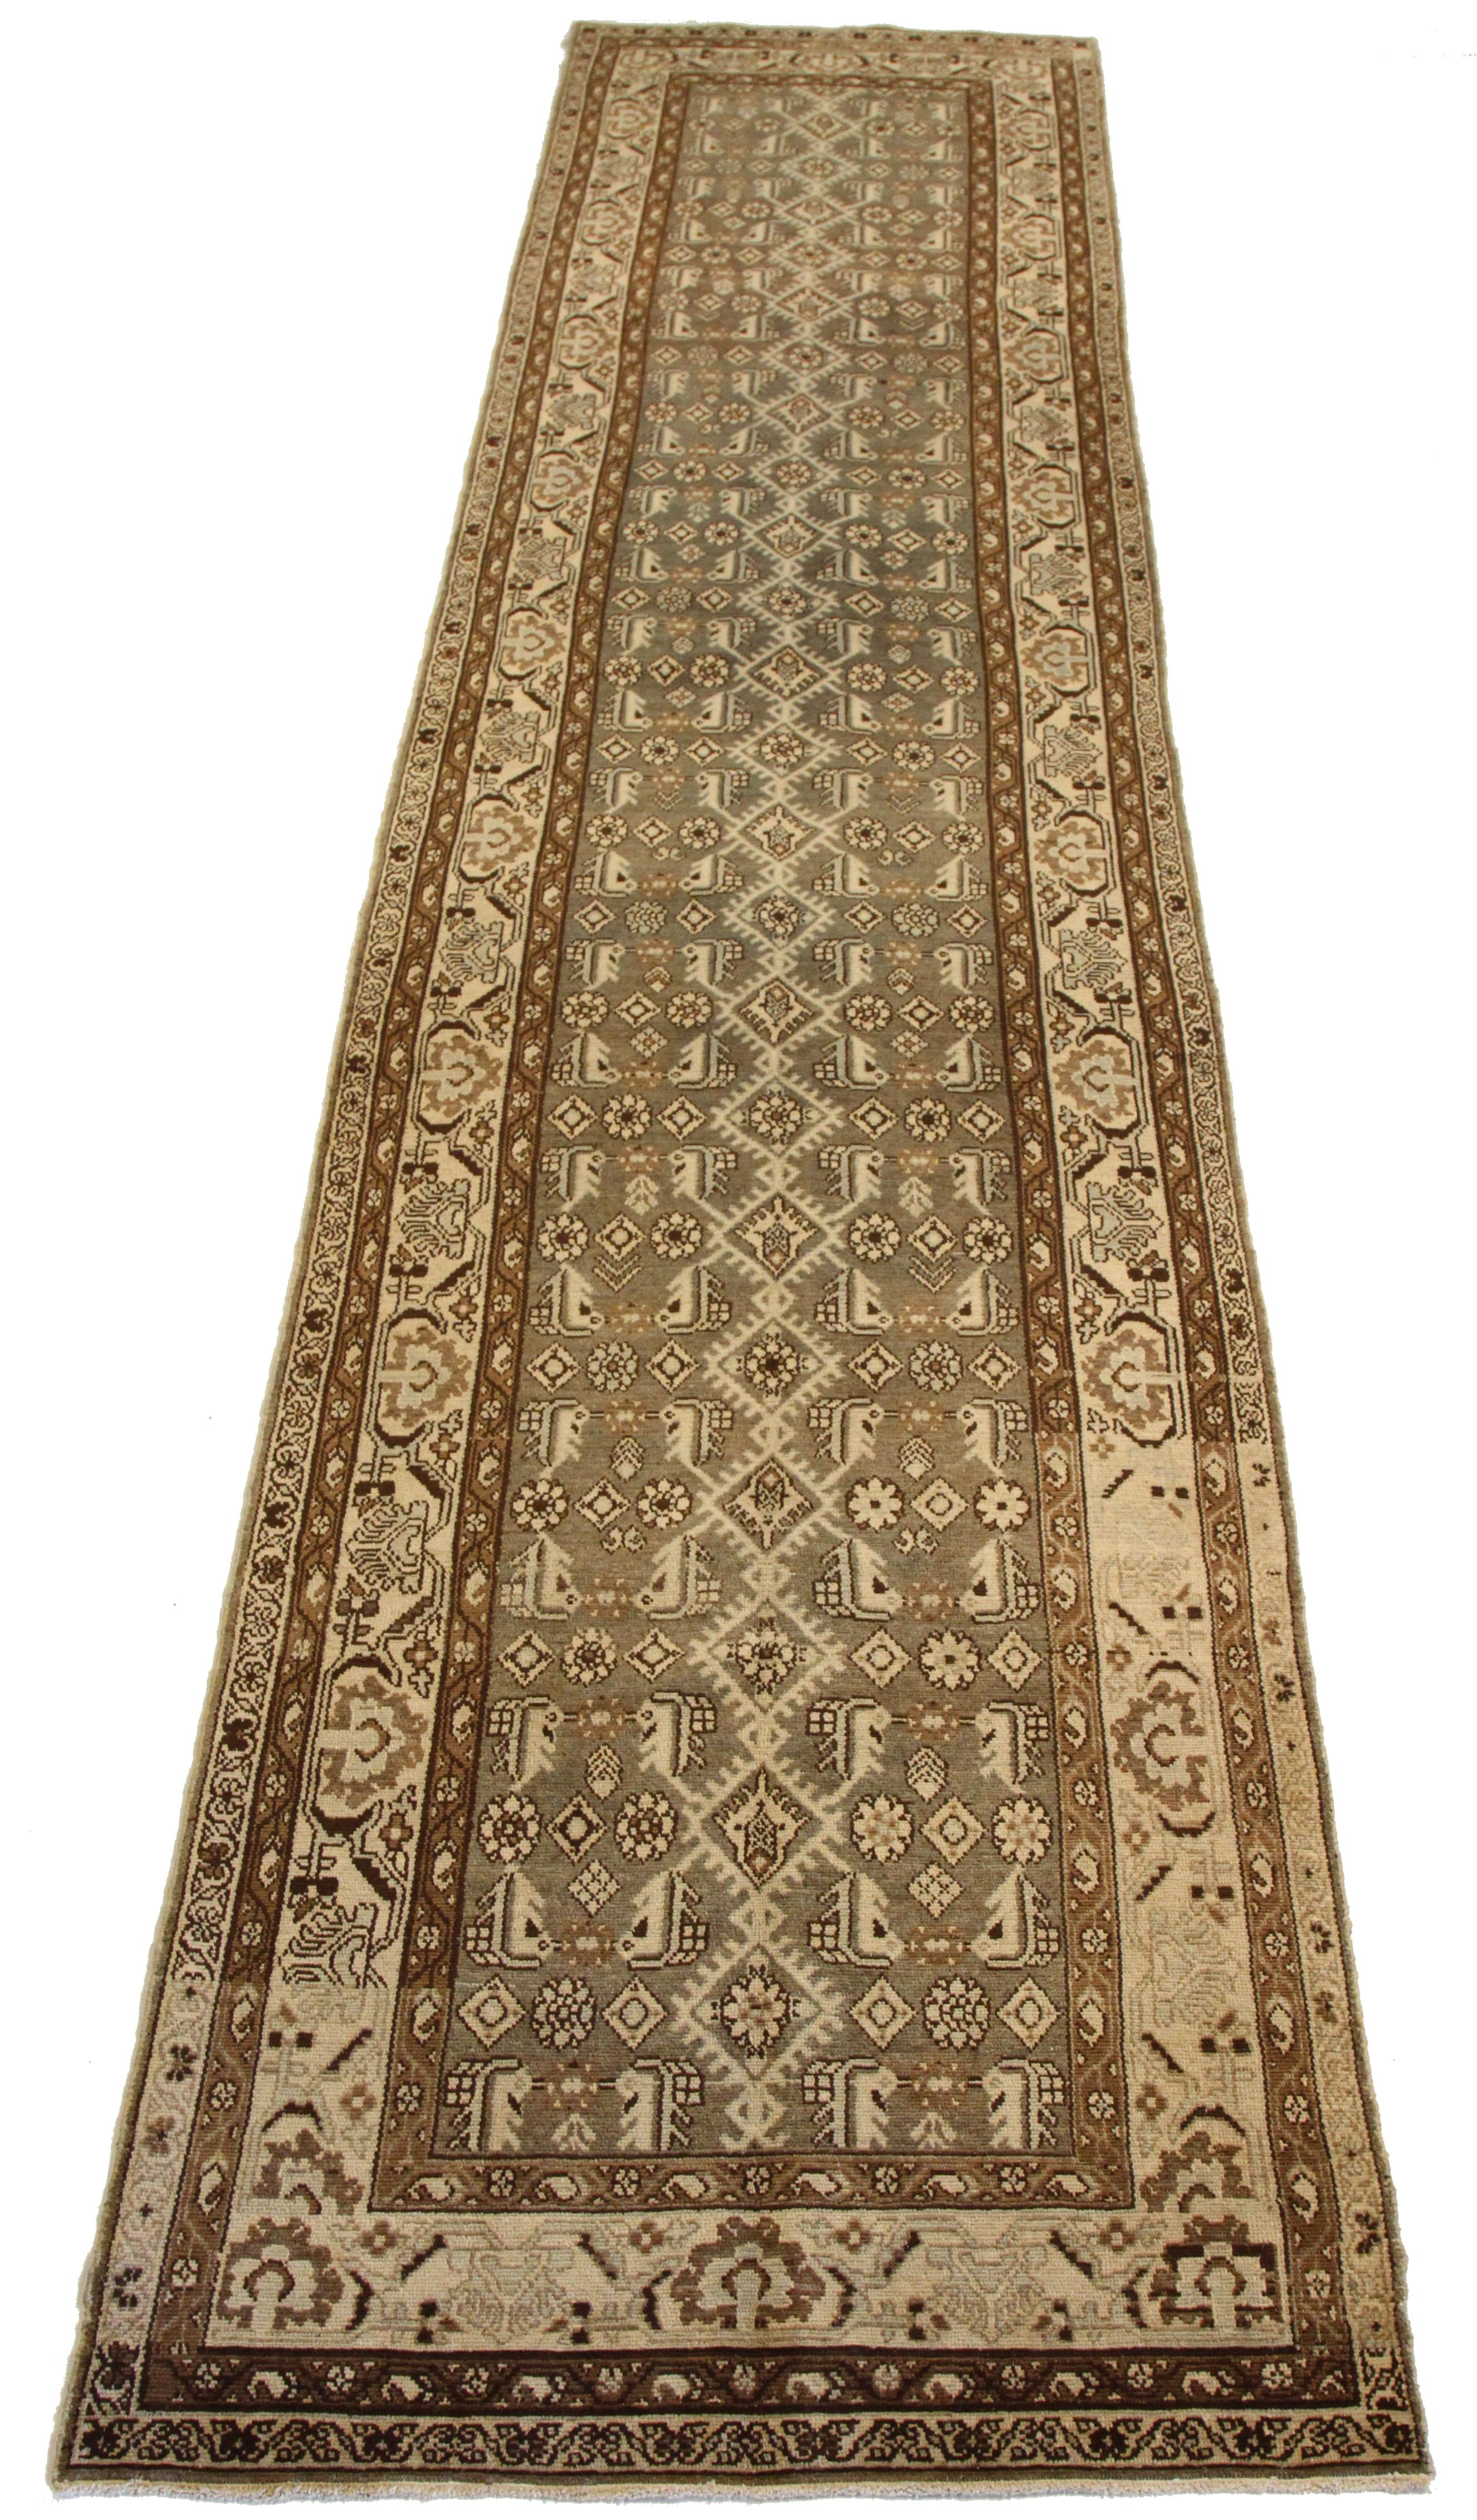 Antique hand-woven Persian runner rug made from fine wool and all-natural vegetable dyes that are safe for people and pets. It features traditional Malayer weaving depicting elaborate 'Boteh' patterns that represents life and eternity in Persian